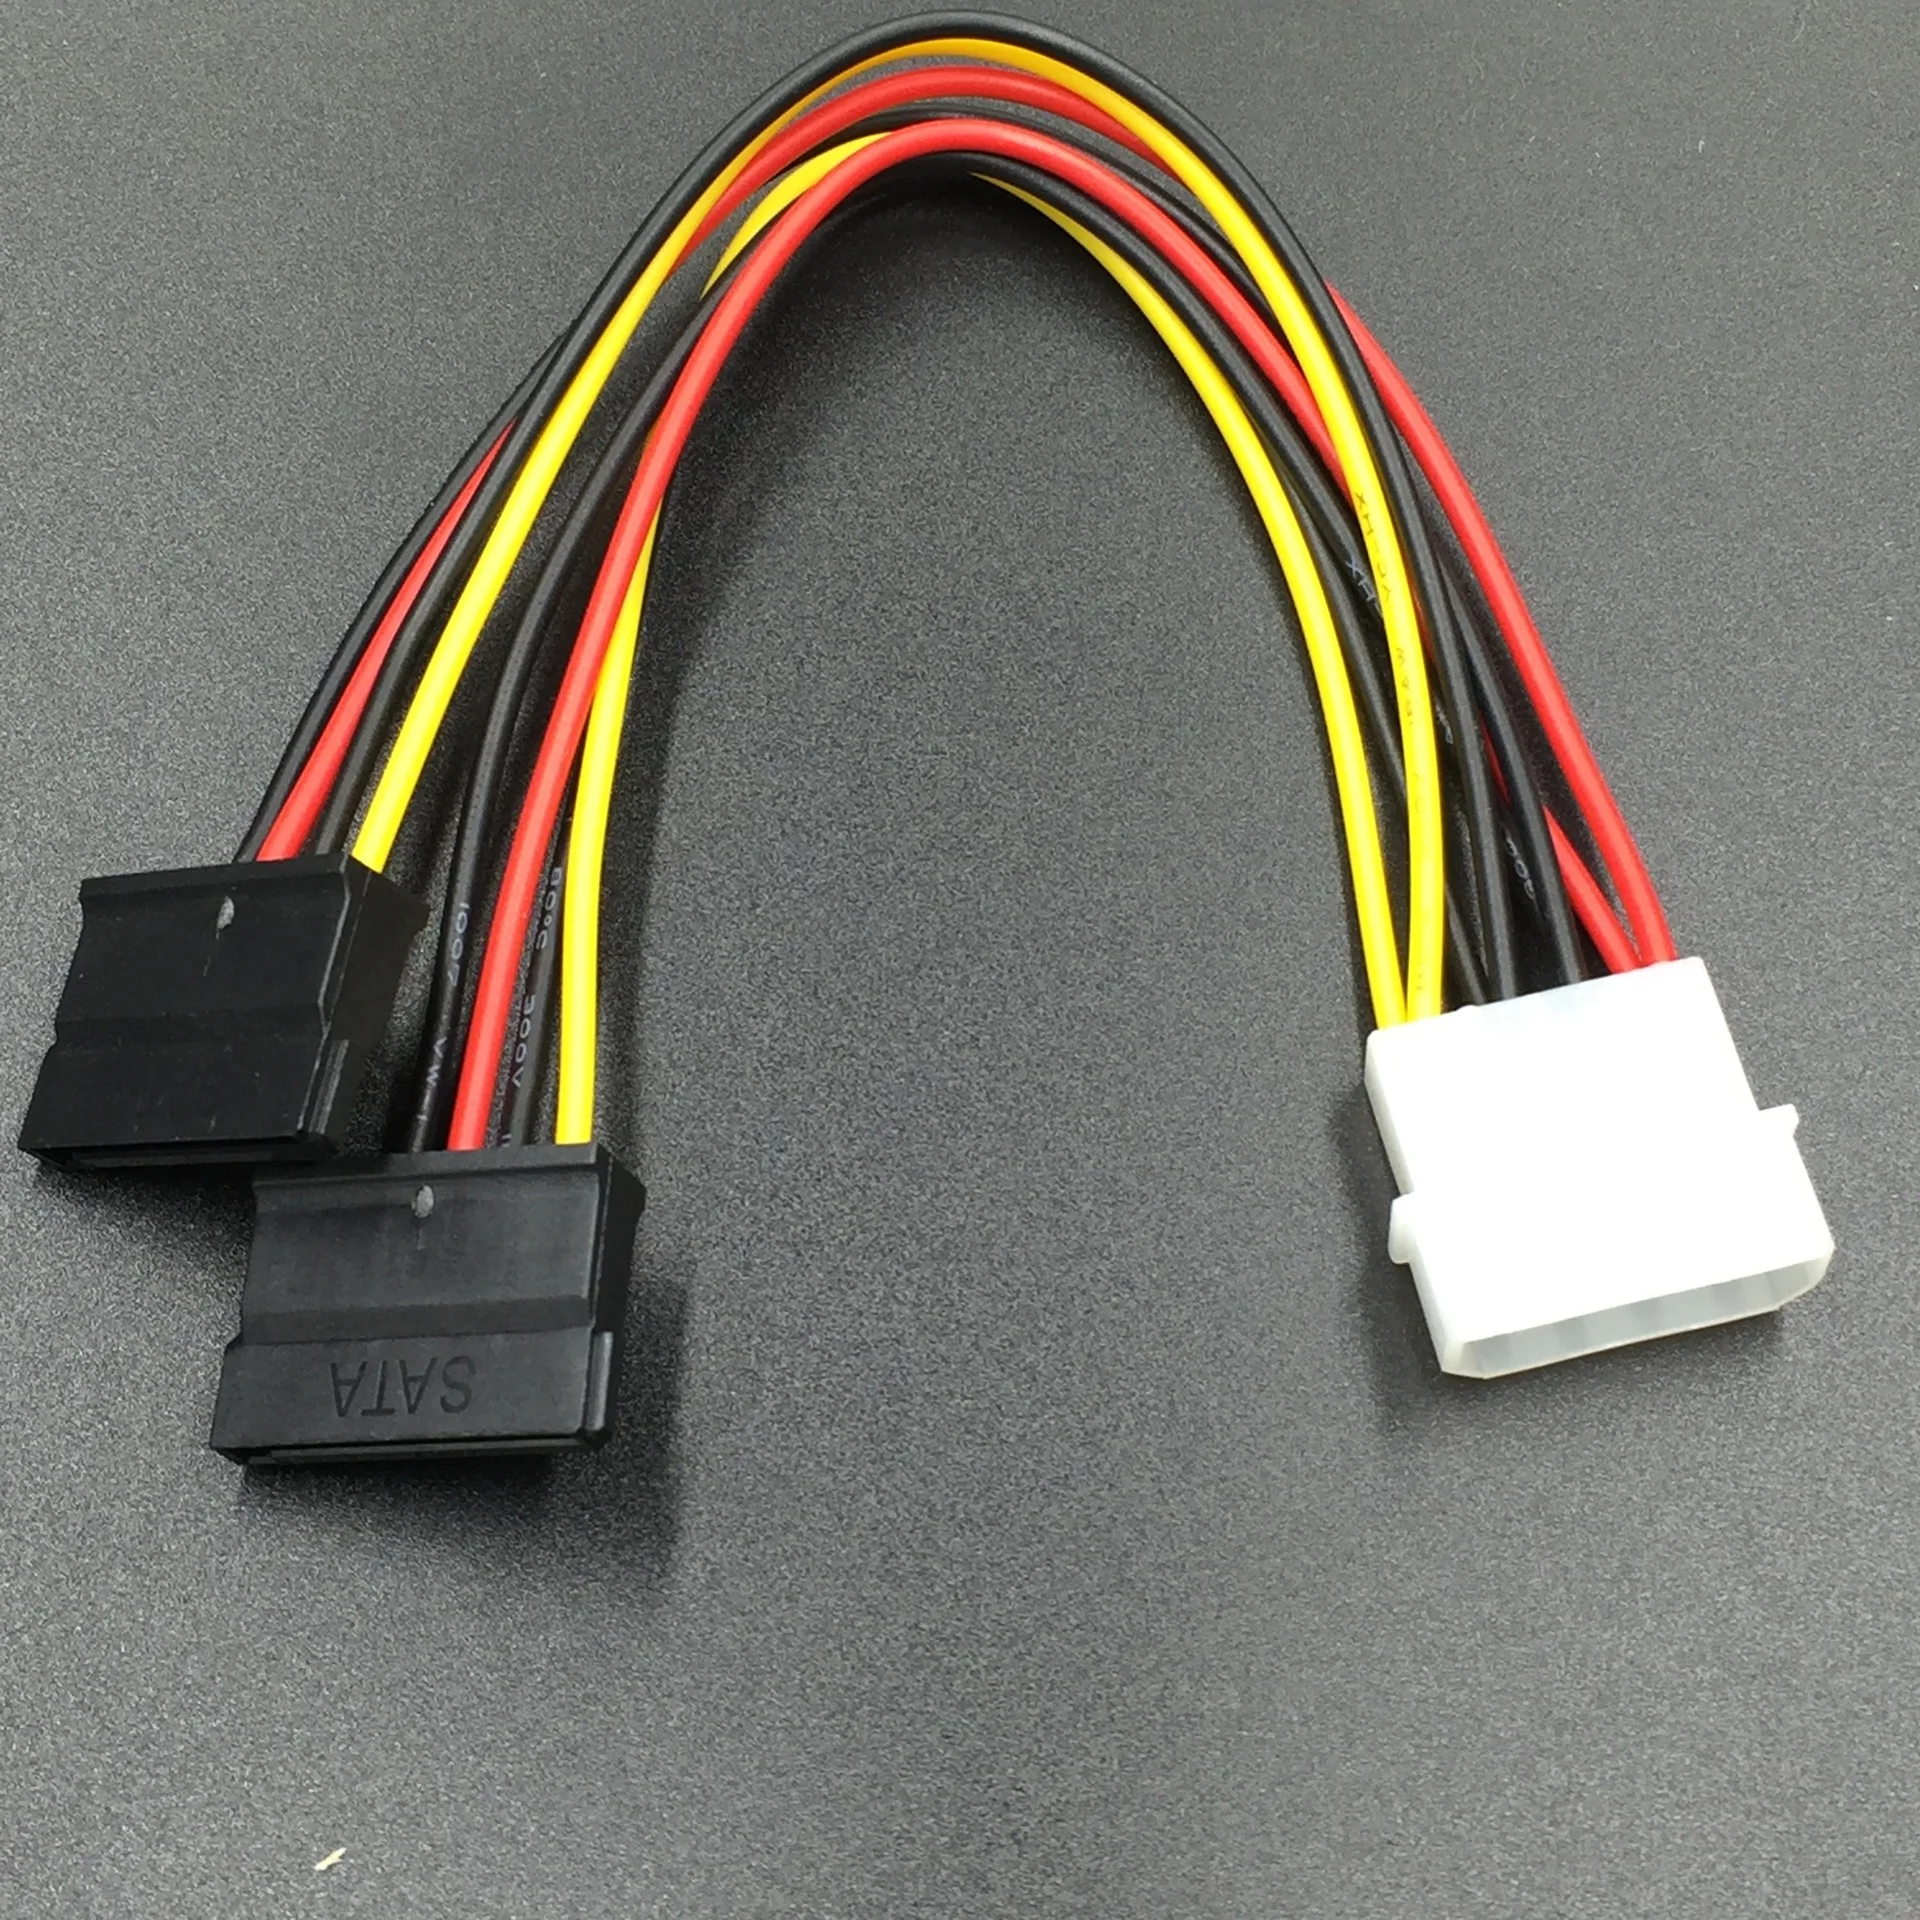 

1pcs Serial ATA SATA 4 Pin IDE Molex To 1/2/3 of 15 Pin HDD Power Adapter Cable Hot Worldwide Promotion